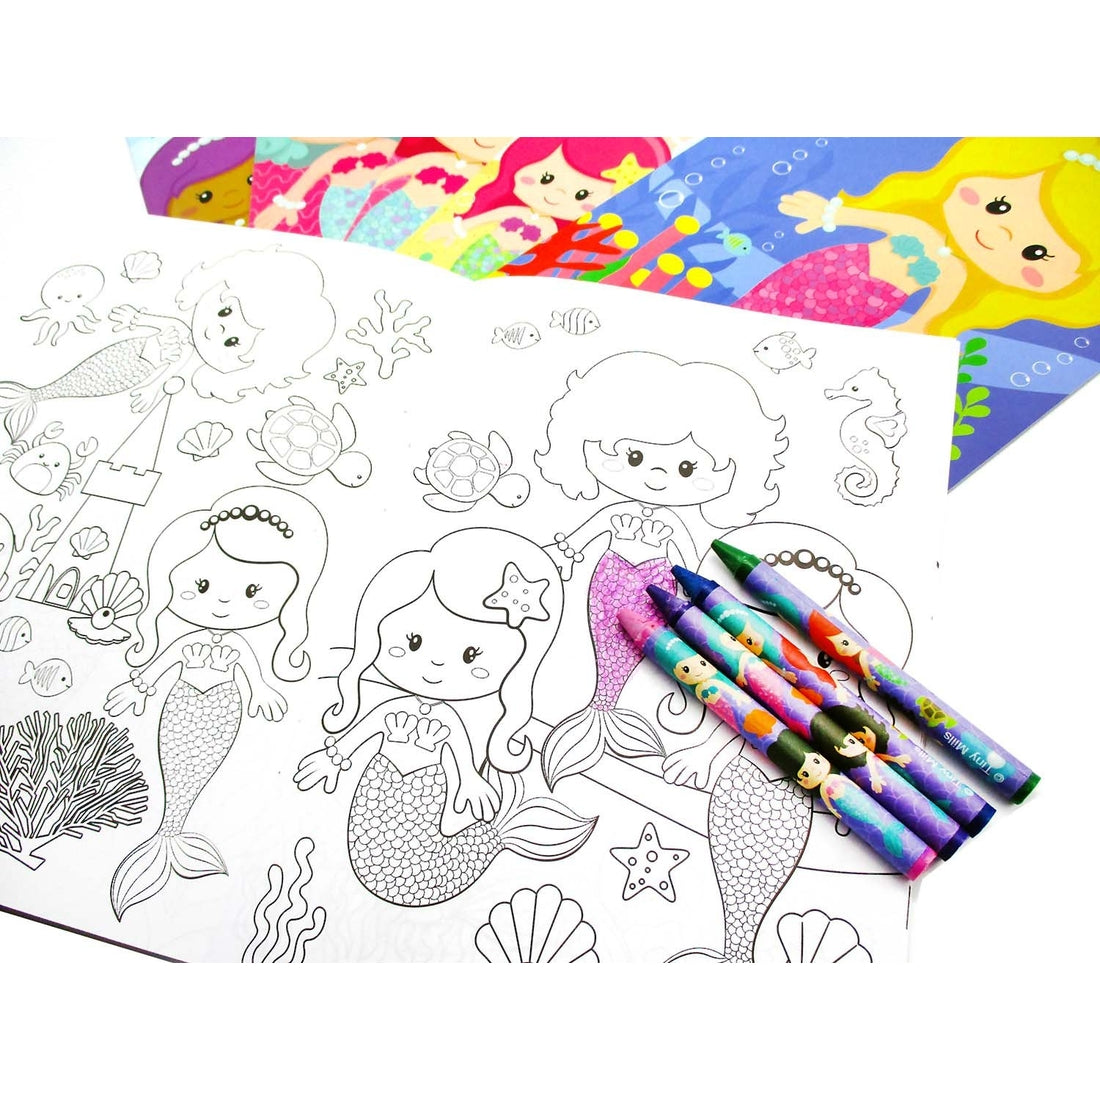 Mermaid Coloring Book with Crayons  - Doodlebug's Children's Boutique